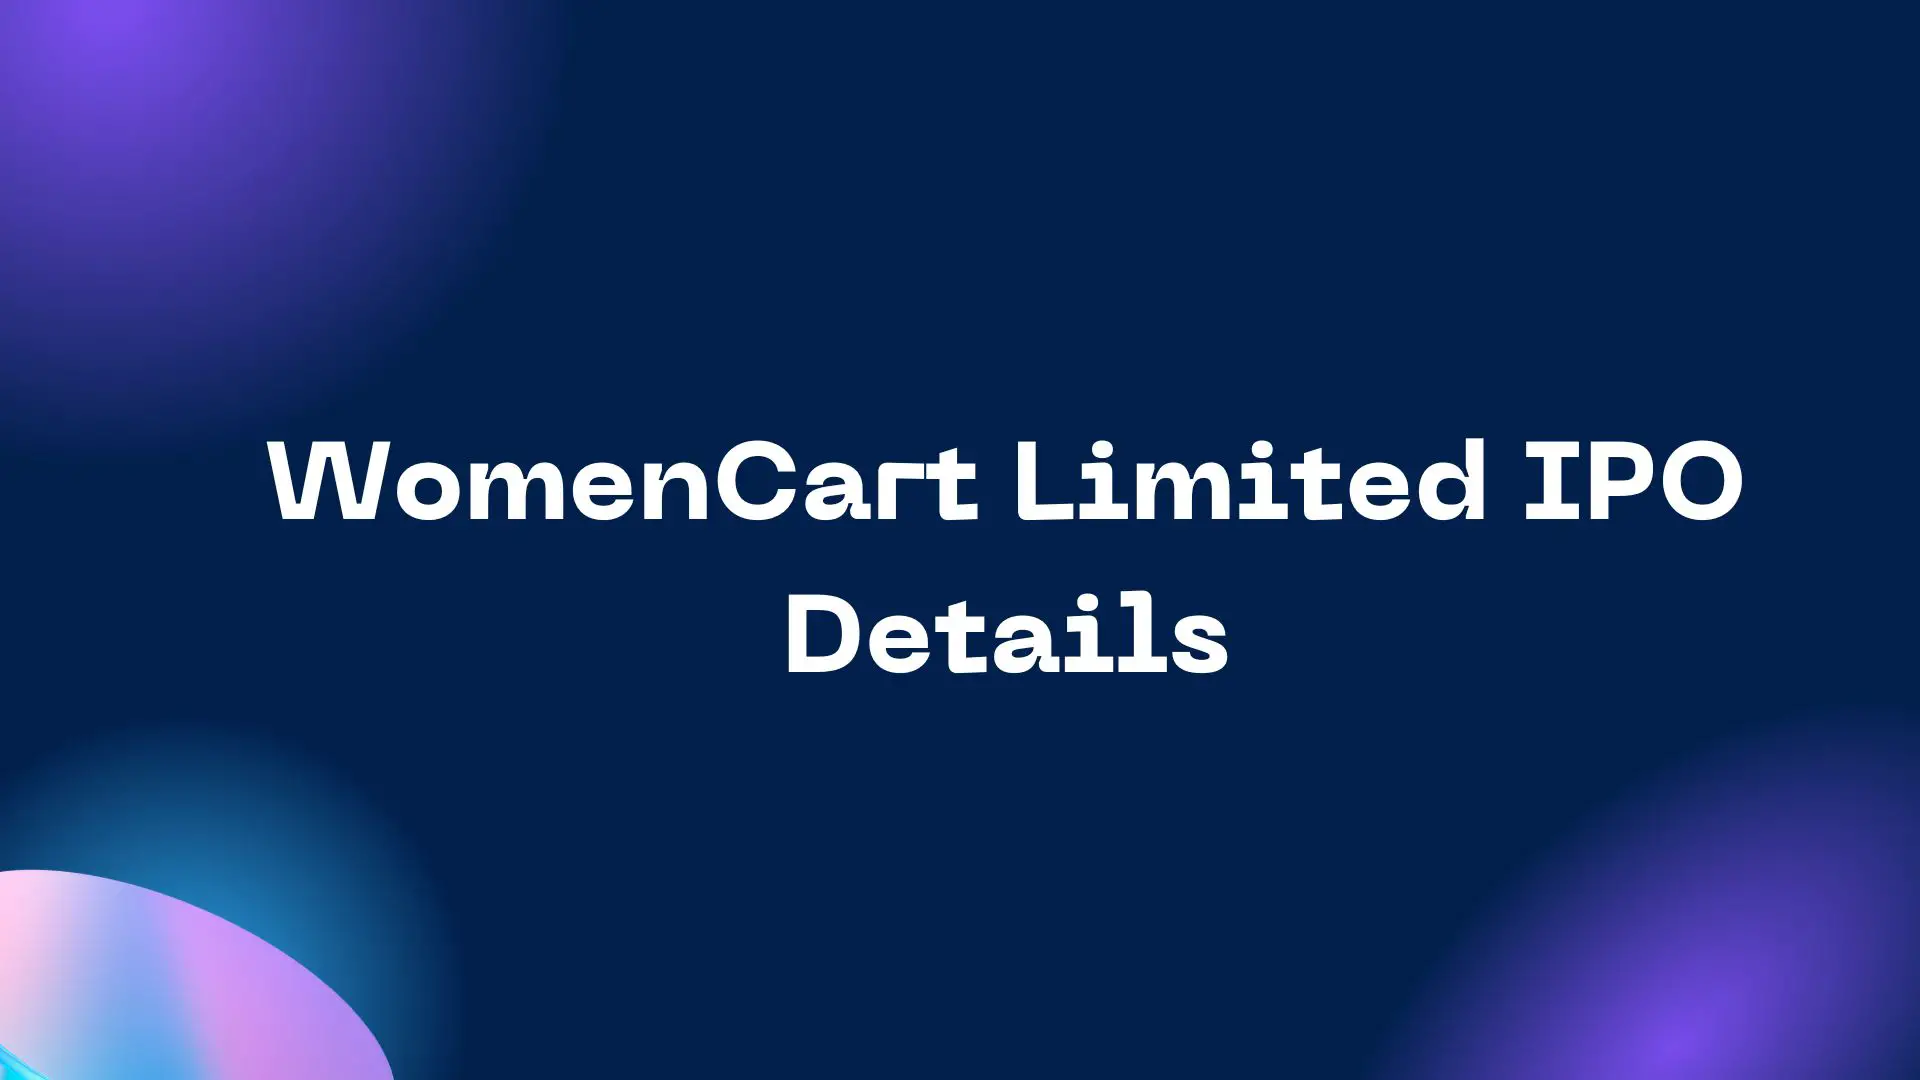 WomenCart Limited IPO Details